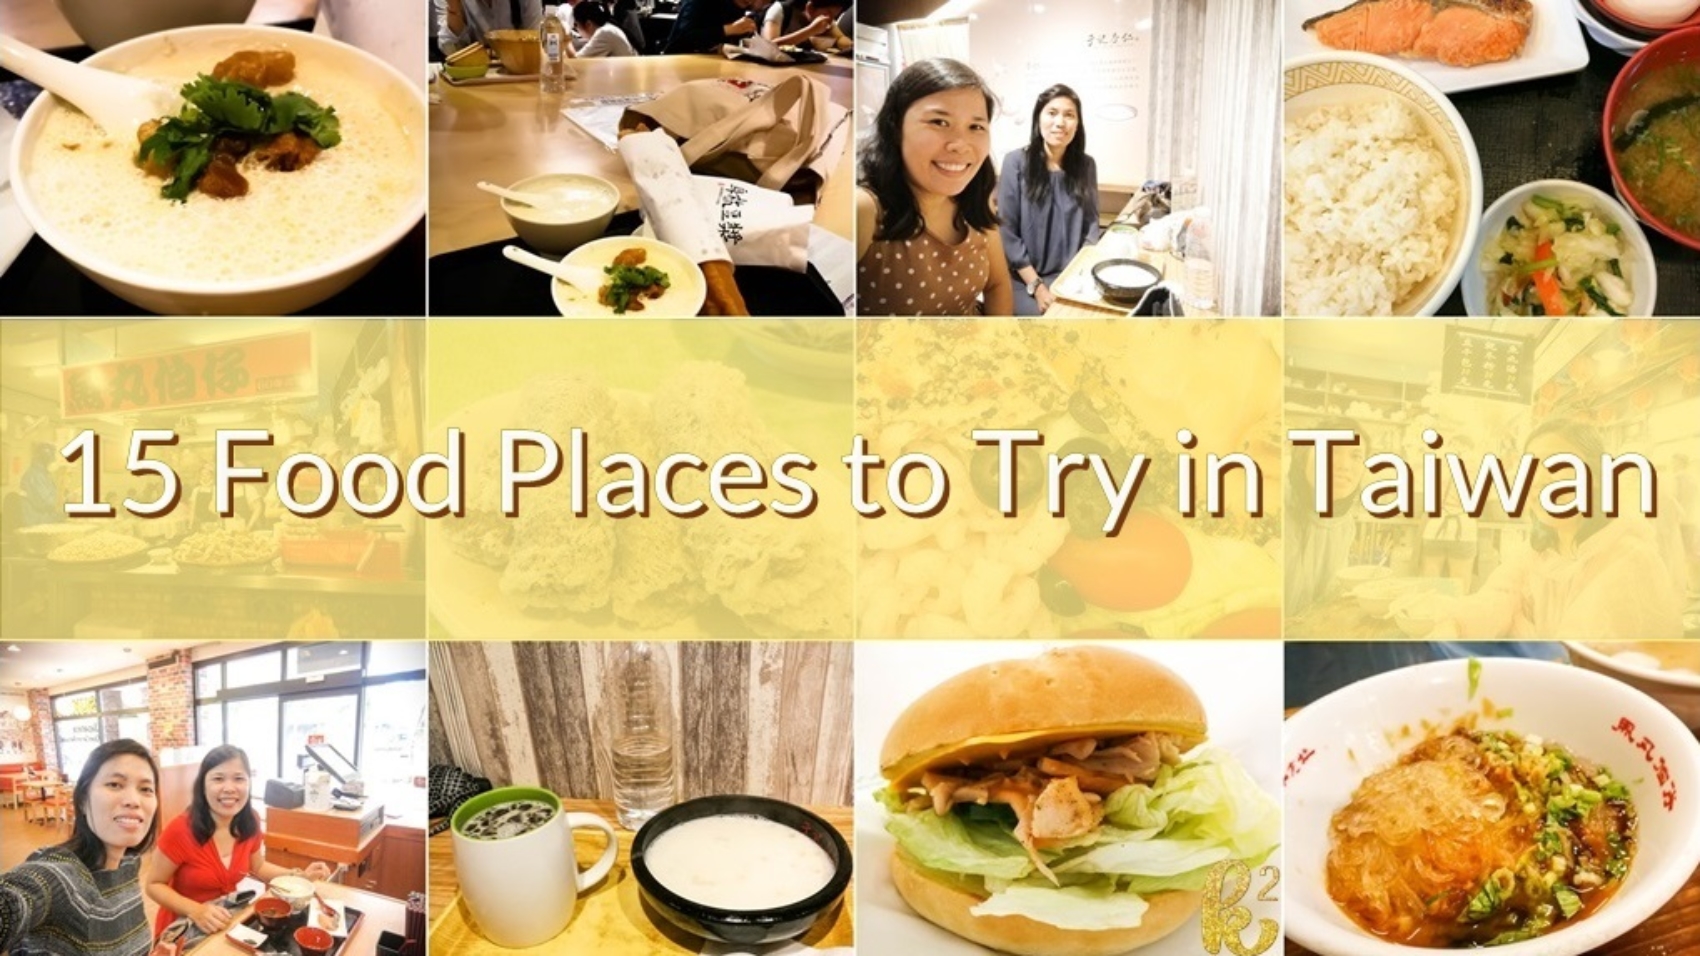 15 food places to try in taiwan, taiwan food blog, taiwan food trip, taiwan food places